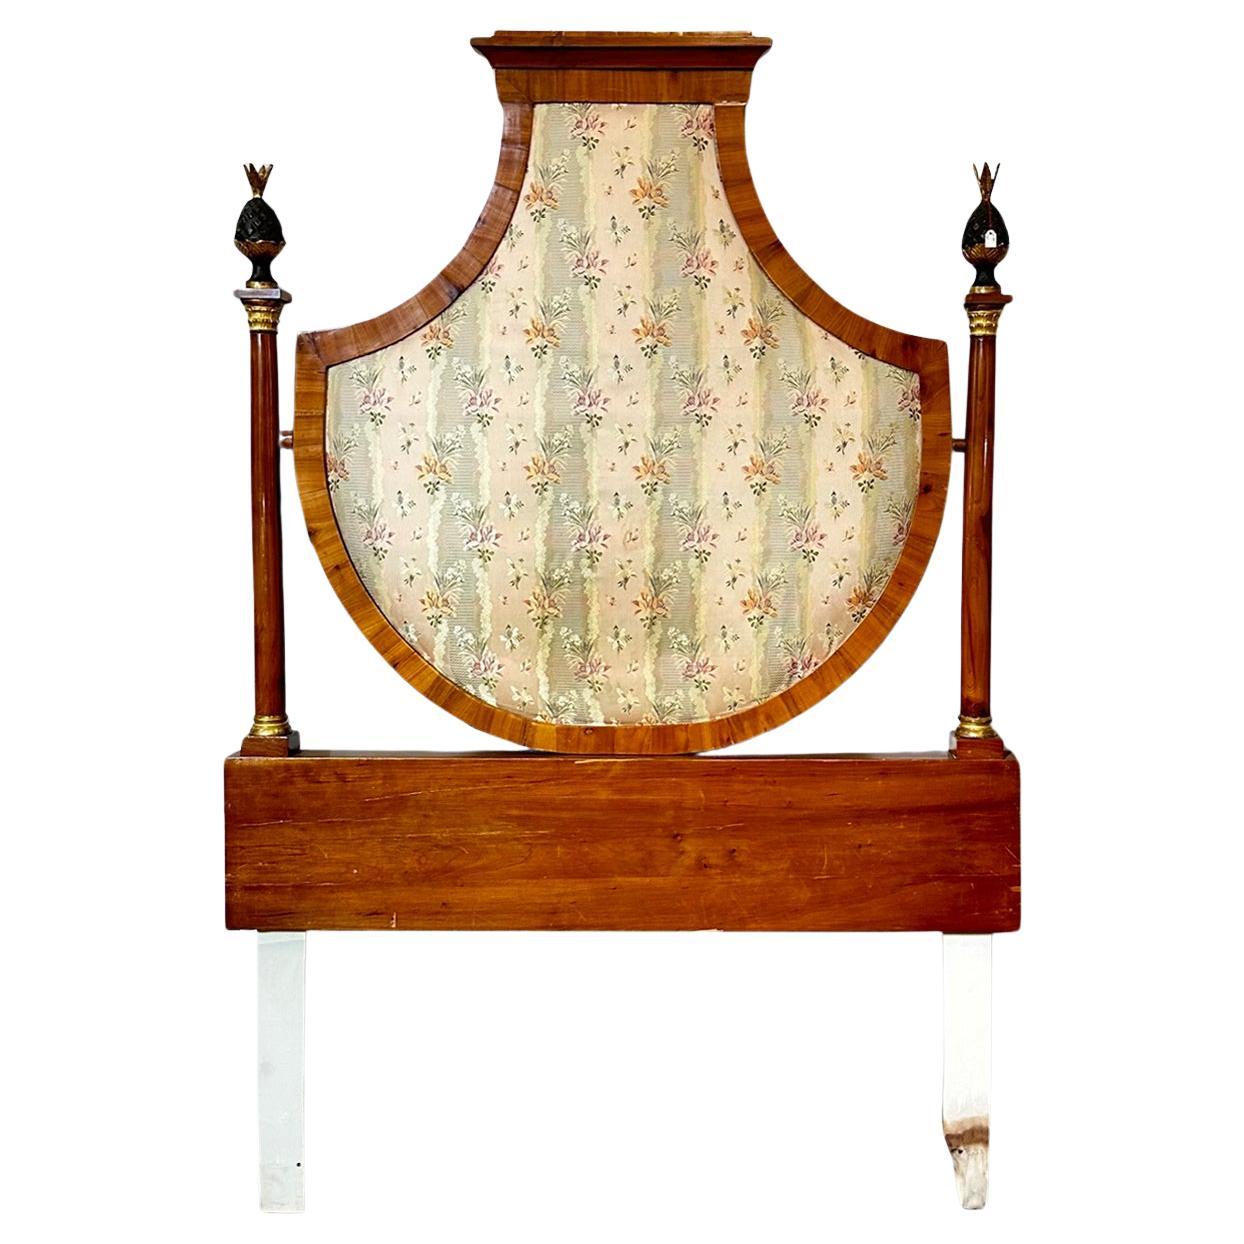 EARLY 19th CENTURY EMPIRE PERIOD BED HEADBOARD 